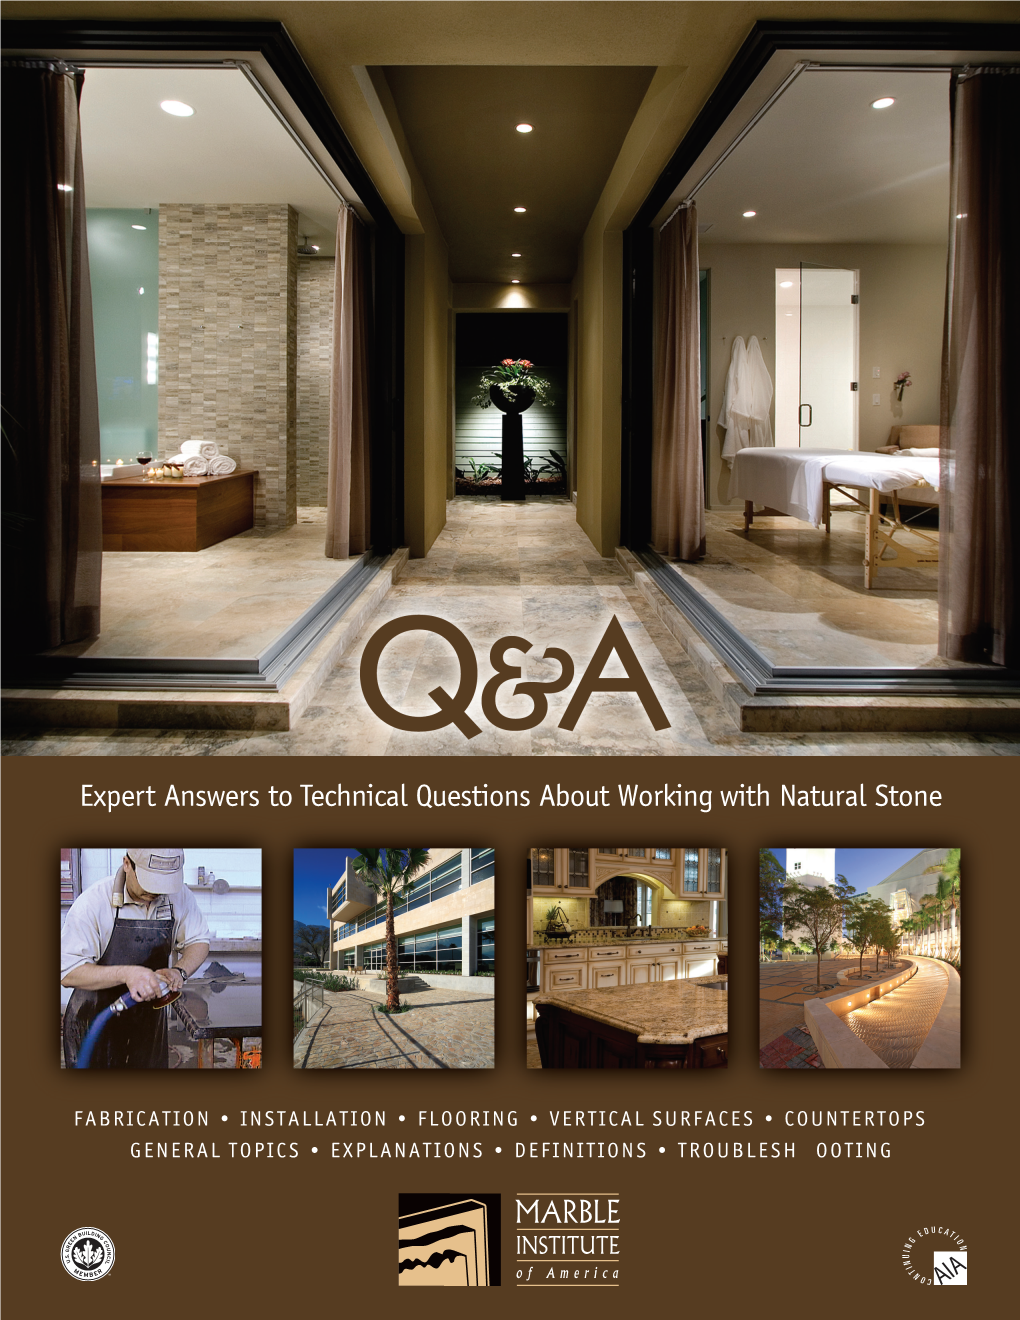 Expert Answers to Technical Questions About Working with Natural Stone